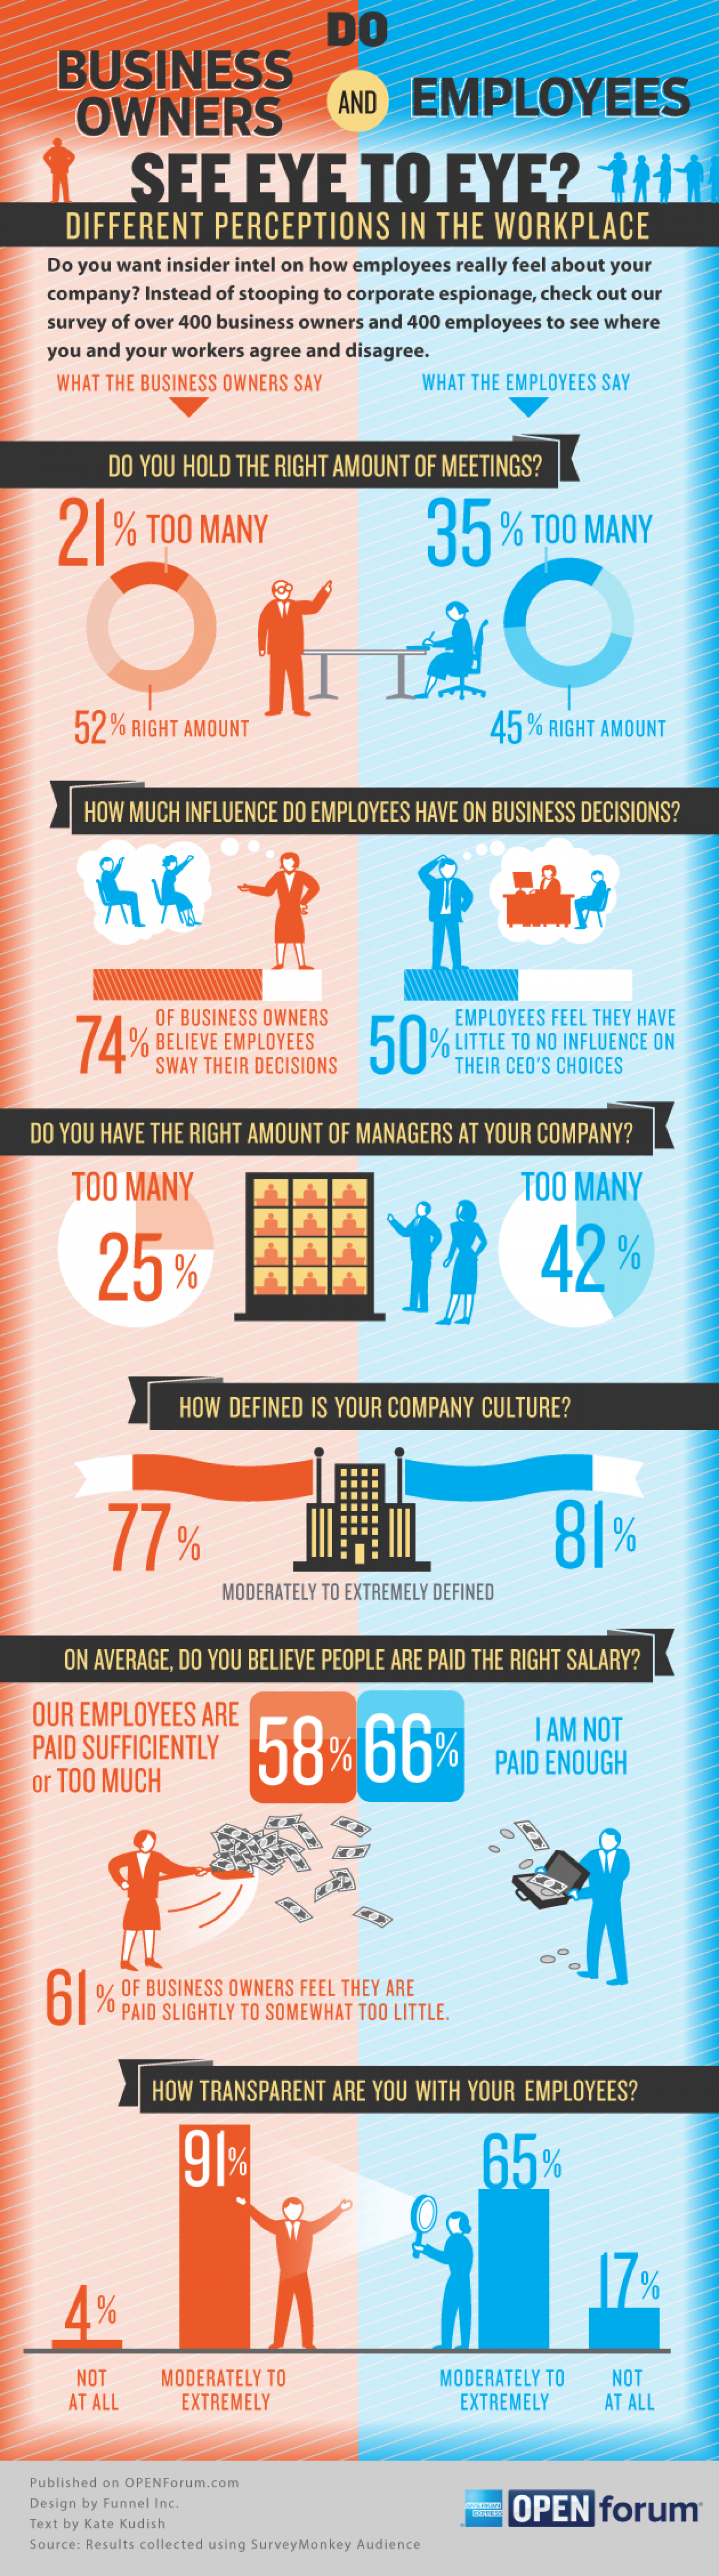 Do Business Owners and Employees See Eye to Eye? Infographic